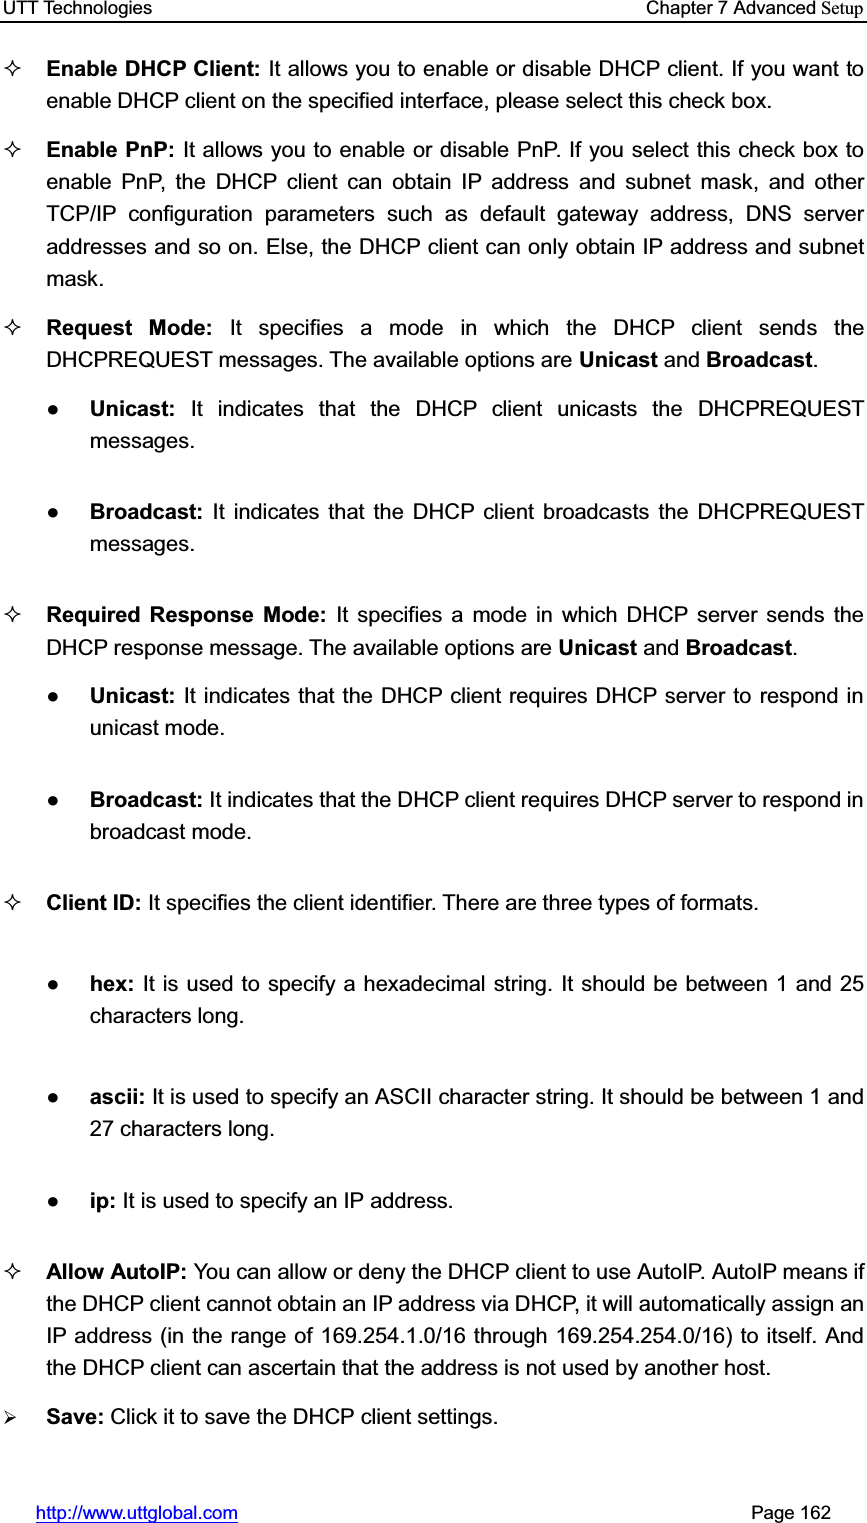 UTT Technologies    Chapter 7 Advanced Setuphttp://www.uttglobal.com                                                       Page 162 Enable DHCP Client: It allows you to enable or disable DHCP client. If you want to enable DHCP client on the specified interface, please select this check box. Enable PnP: It allows you to enable or disable PnP. If you select this check box to enable PnP, the DHCP client can obtain IP address and subnet mask, and other TCP/IP configuration parameters such as default gateway address, DNS server addresses and so on. Else, the DHCP client can only obtain IP address and subnet mask. Request Mode: It specifies a mode in which the DHCP client sends the DHCPREQUEST messages. The available options are Unicast and Broadcast.ƔUnicast: It indicates that the DHCP client unicasts the DHCPREQUEST messages. ƔBroadcast:  It indicates that the DHCP client broadcasts the DHCPREQUEST messages. Required Response Mode: It specifies a mode in which DHCP server sends the DHCP response message. The available options are Unicast and Broadcast.ƔUnicast: It indicates that the DHCP client requires DHCP server to respond in unicast mode. ƔBroadcast: It indicates that the DHCP client requires DHCP server to respond in broadcast mode. Client ID: It specifies the client identifier. There are three types of formats. Ɣhex: It is used to specify a hexadecimal string. It should be between 1 and 25 characters long.Ɣascii: It is used to specify an ASCII character string. It should be between 1 and 27 characters long.Ɣip: It is used to specify an IP address. Allow AutoIP: You can allow or deny the DHCP client to use AutoIP. AutoIP means if the DHCP client cannot obtain an IP address via DHCP, it will automatically assign an IP address (in the range of 169.254.1.0/16 through 169.254.254.0/16) to itself. And the DHCP client can ascertain that the address is not used by another host. ¾Save: Click it to save the DHCP client settings.